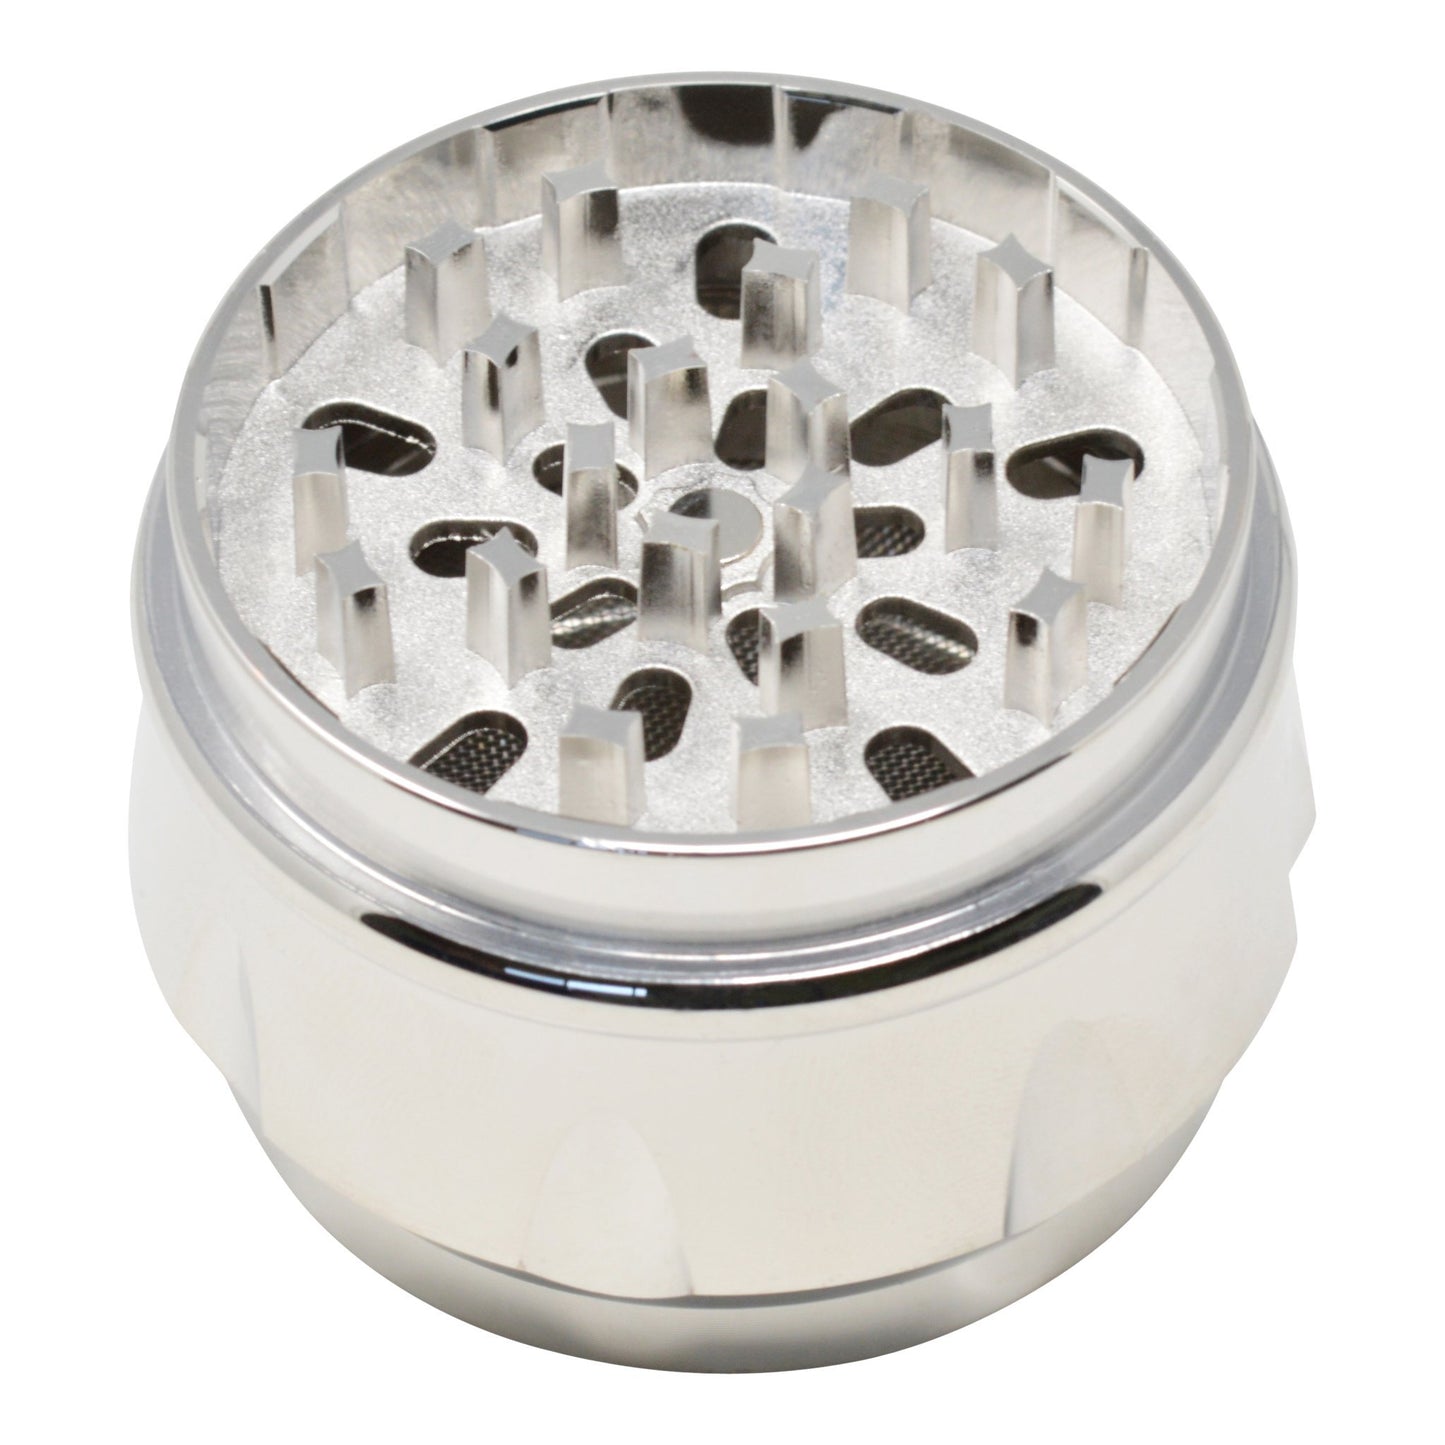 Full shot of the scraper of 4-piece 52mm metal grinder smoking accessory in sleek silver color open without the lid